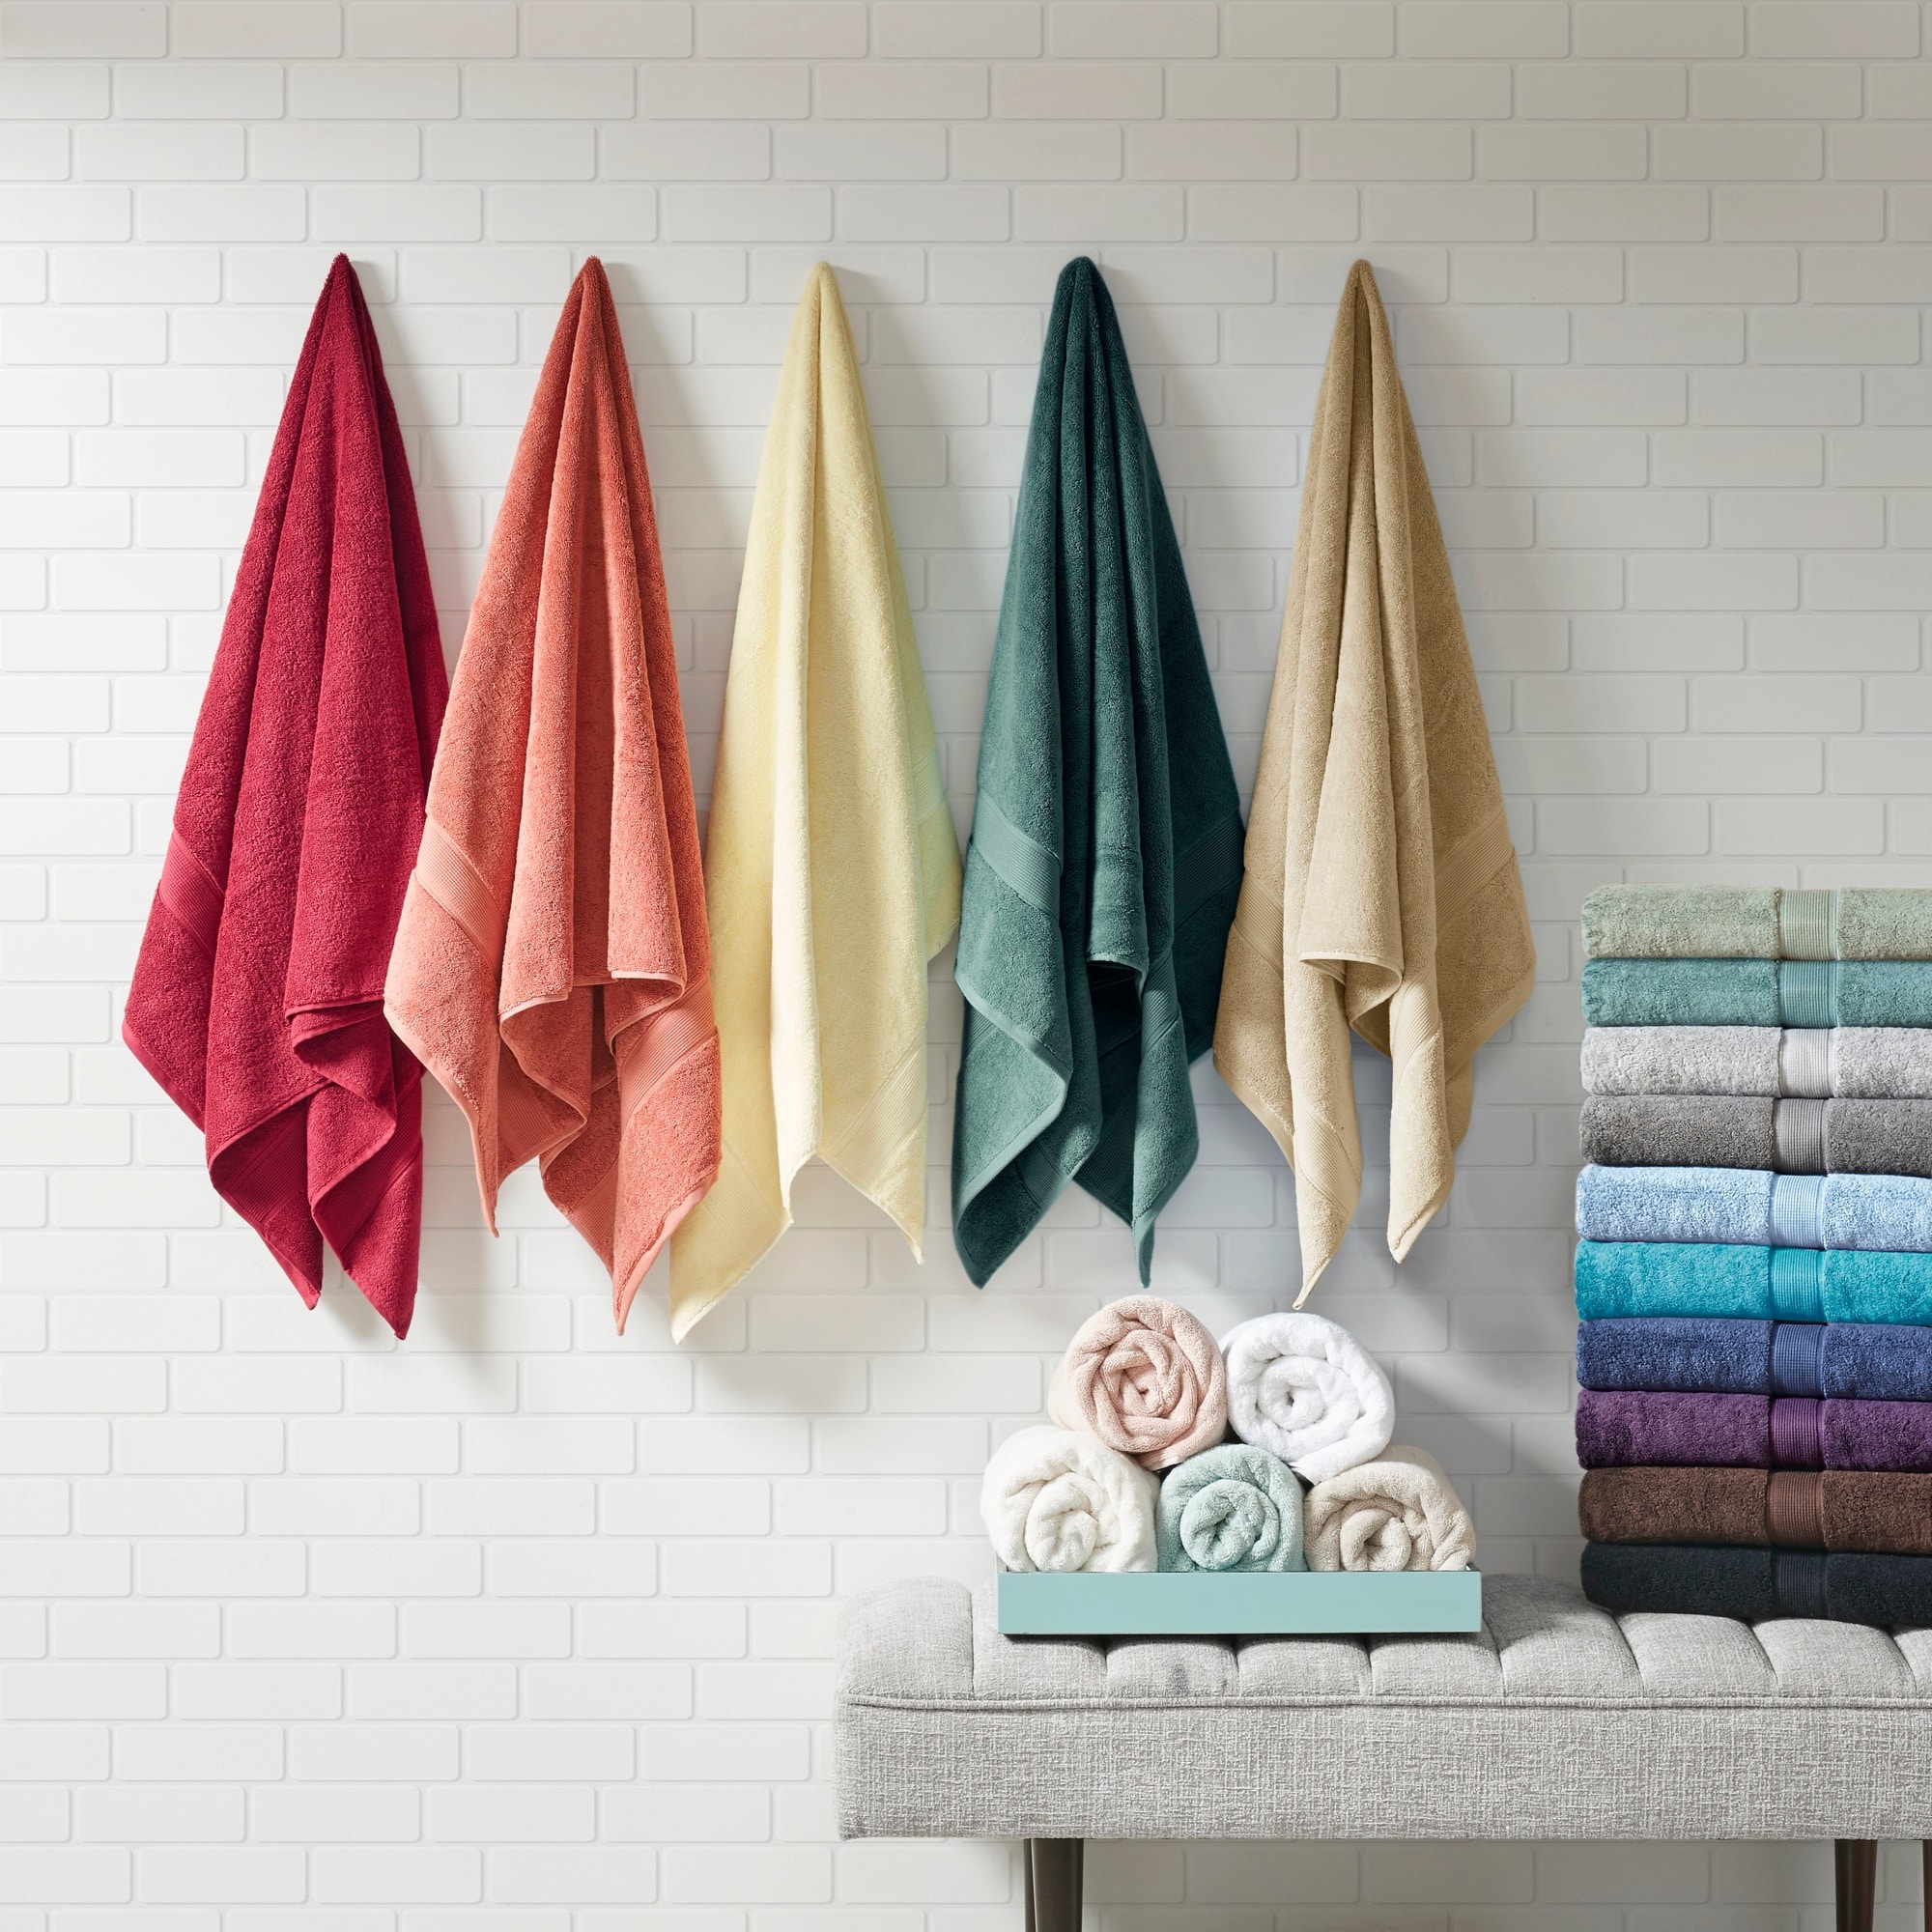 https://ak1.ostkcdn.com/images/products/is/images/direct/7b2e3c9d15684b507a9e466ba92addc26f005ed3/Madison-Park-Signature-Cotton-8-piece-Antimicrobial-Towel-Set.jpg